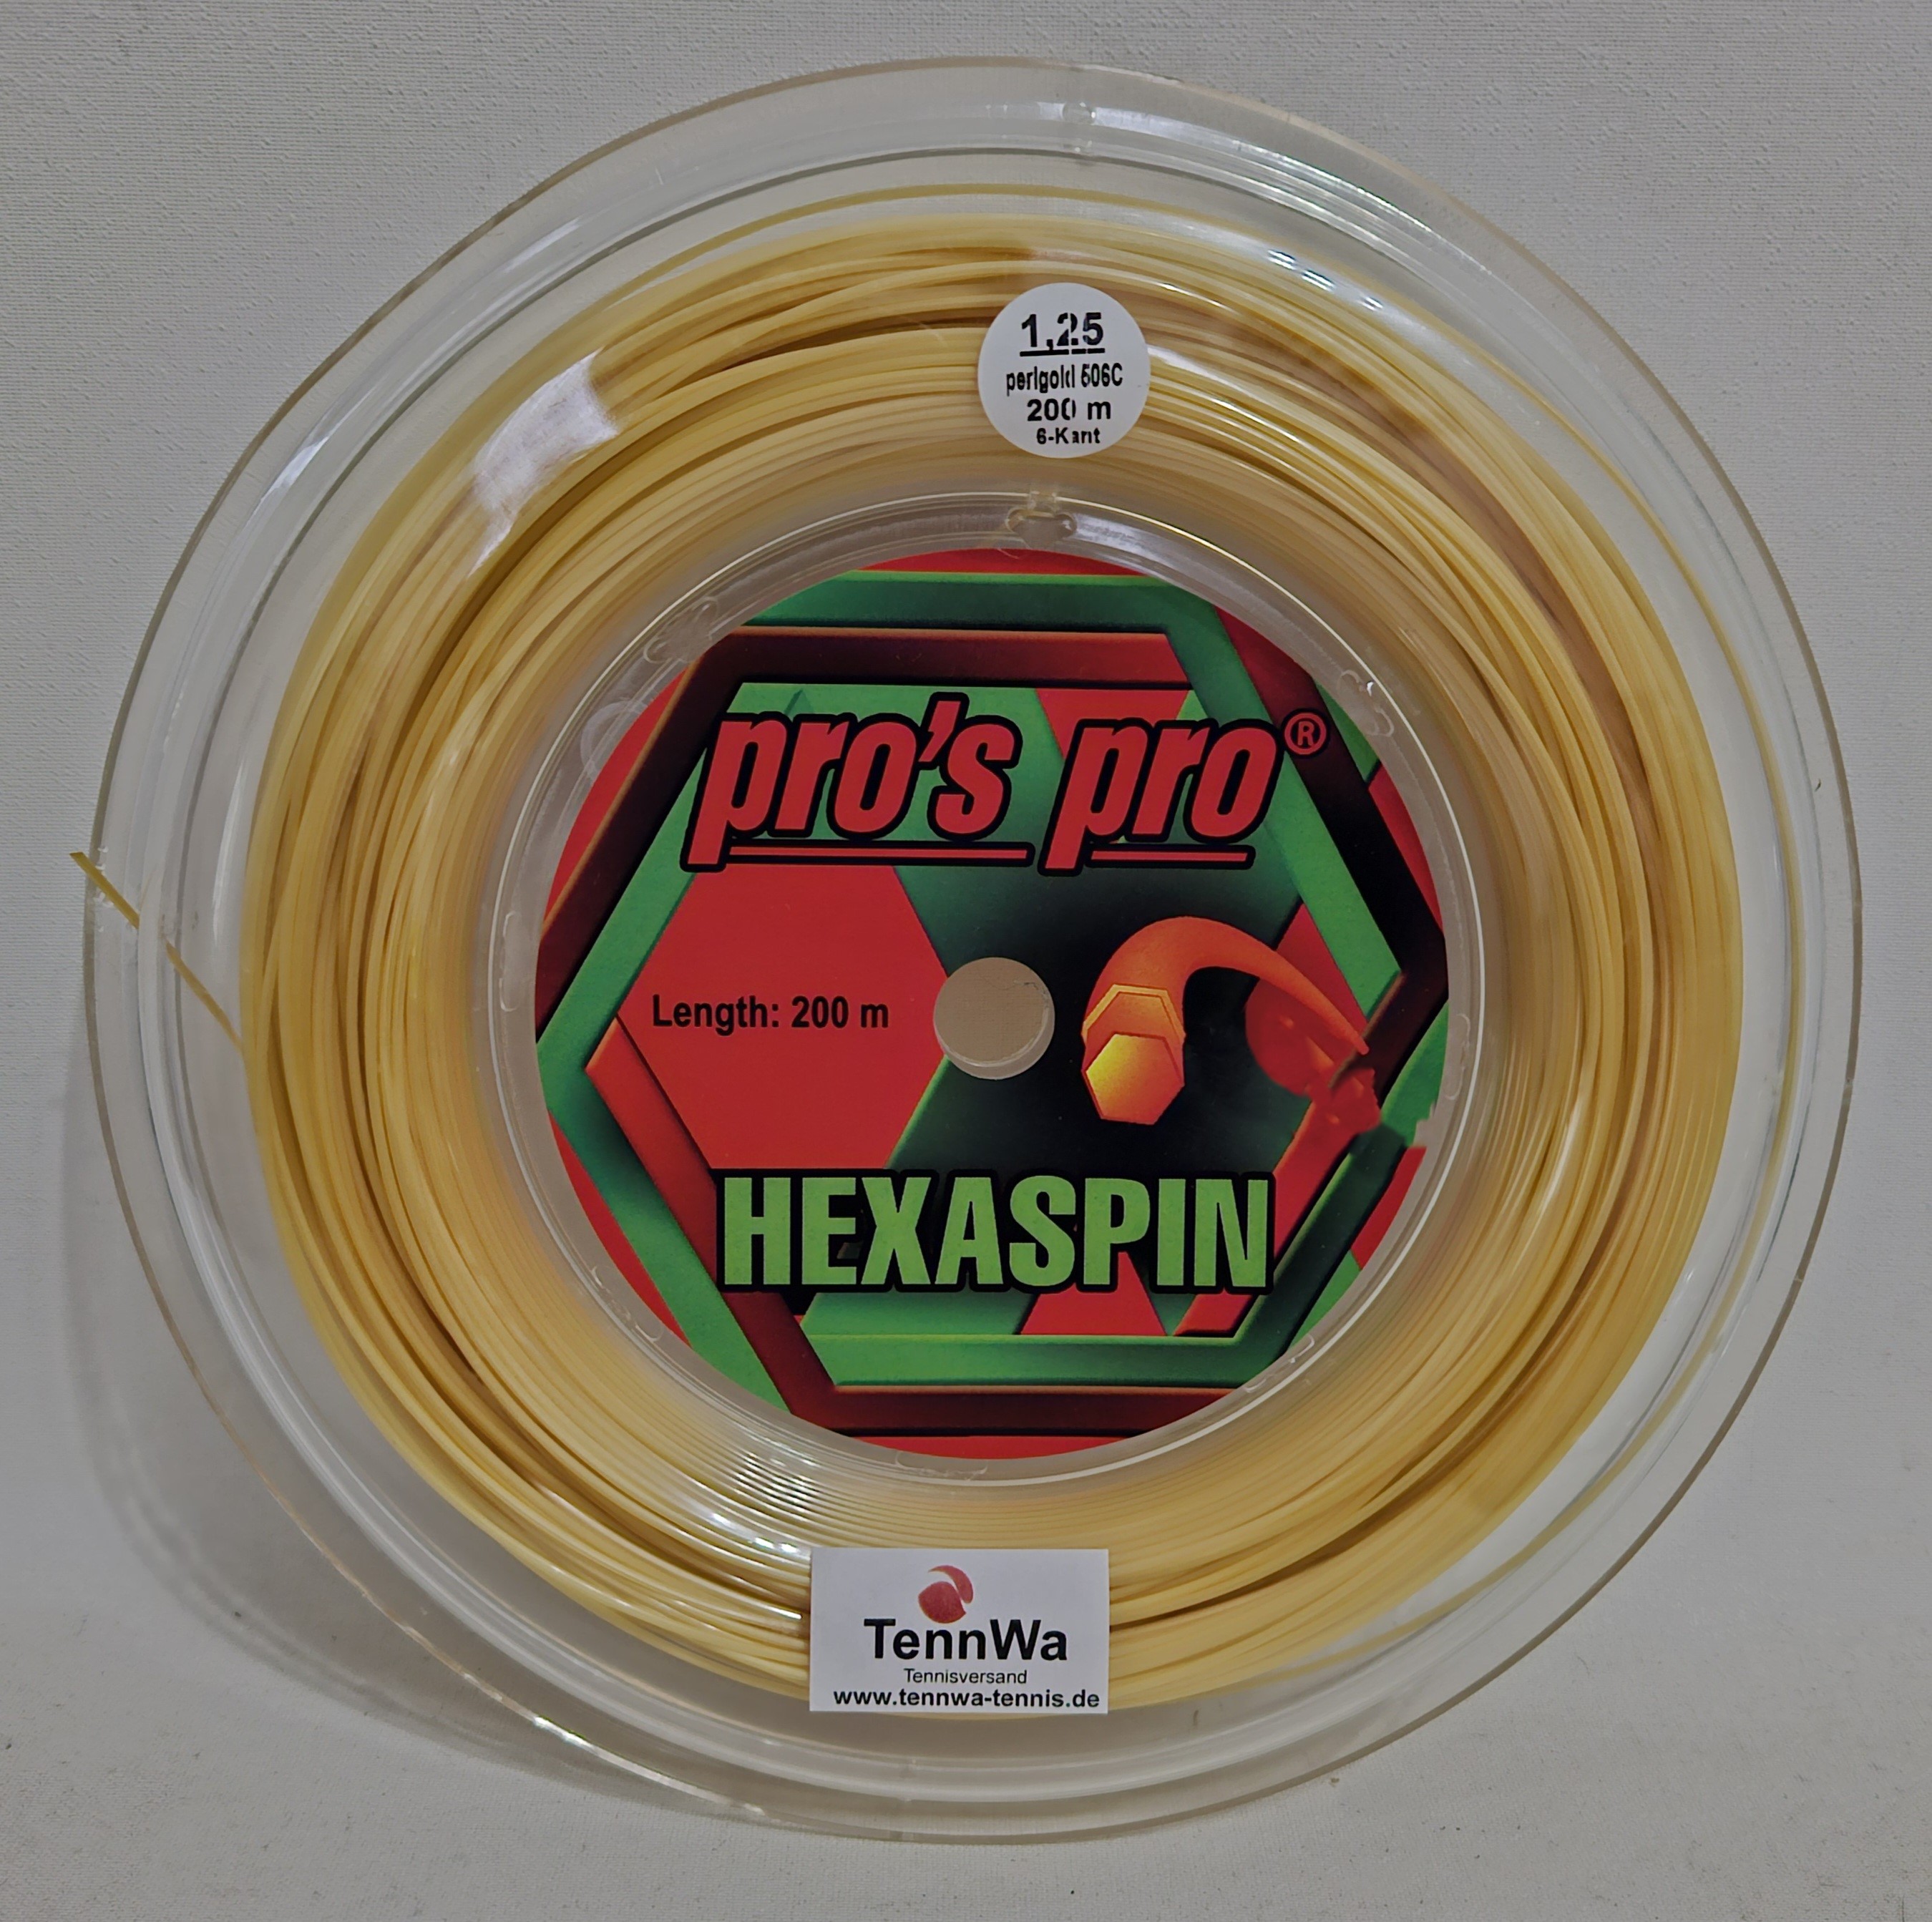 Pros Pro Hexaspin gold, 200m